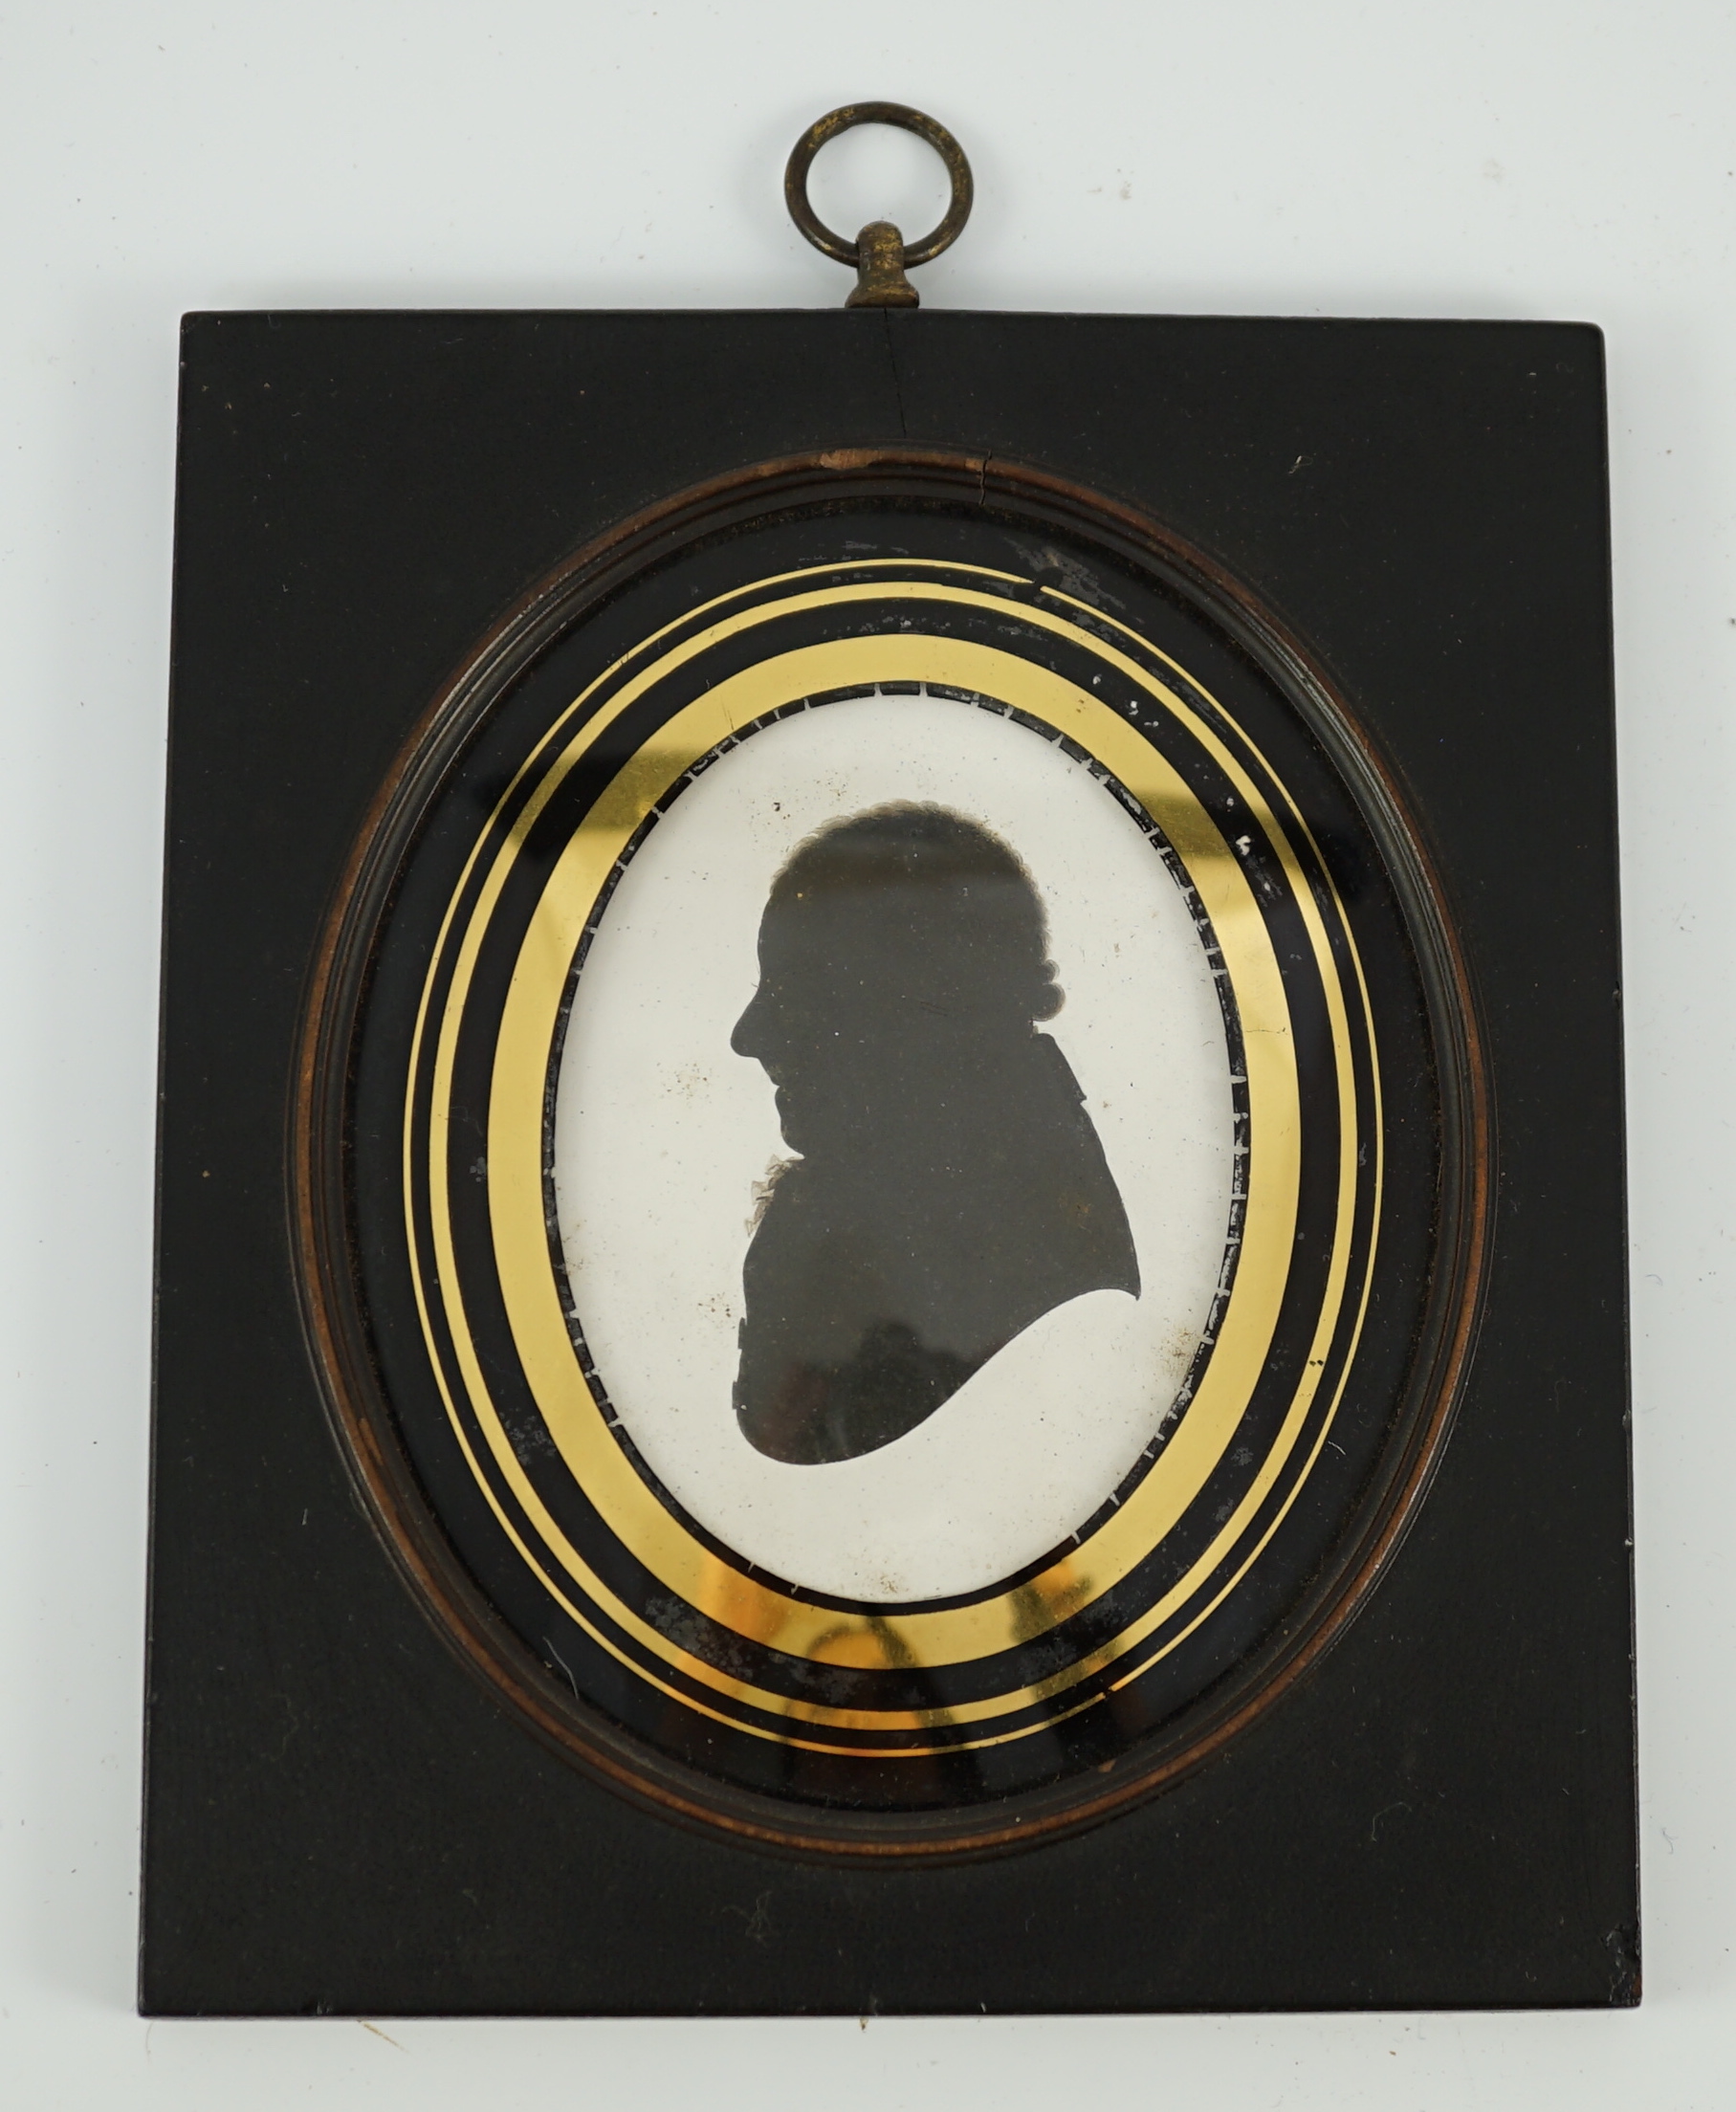 John Miers (1752-1821) and John Field (1772-1848), Silhouette of a gentleman, painted plaster, 8.2 x 6cm.